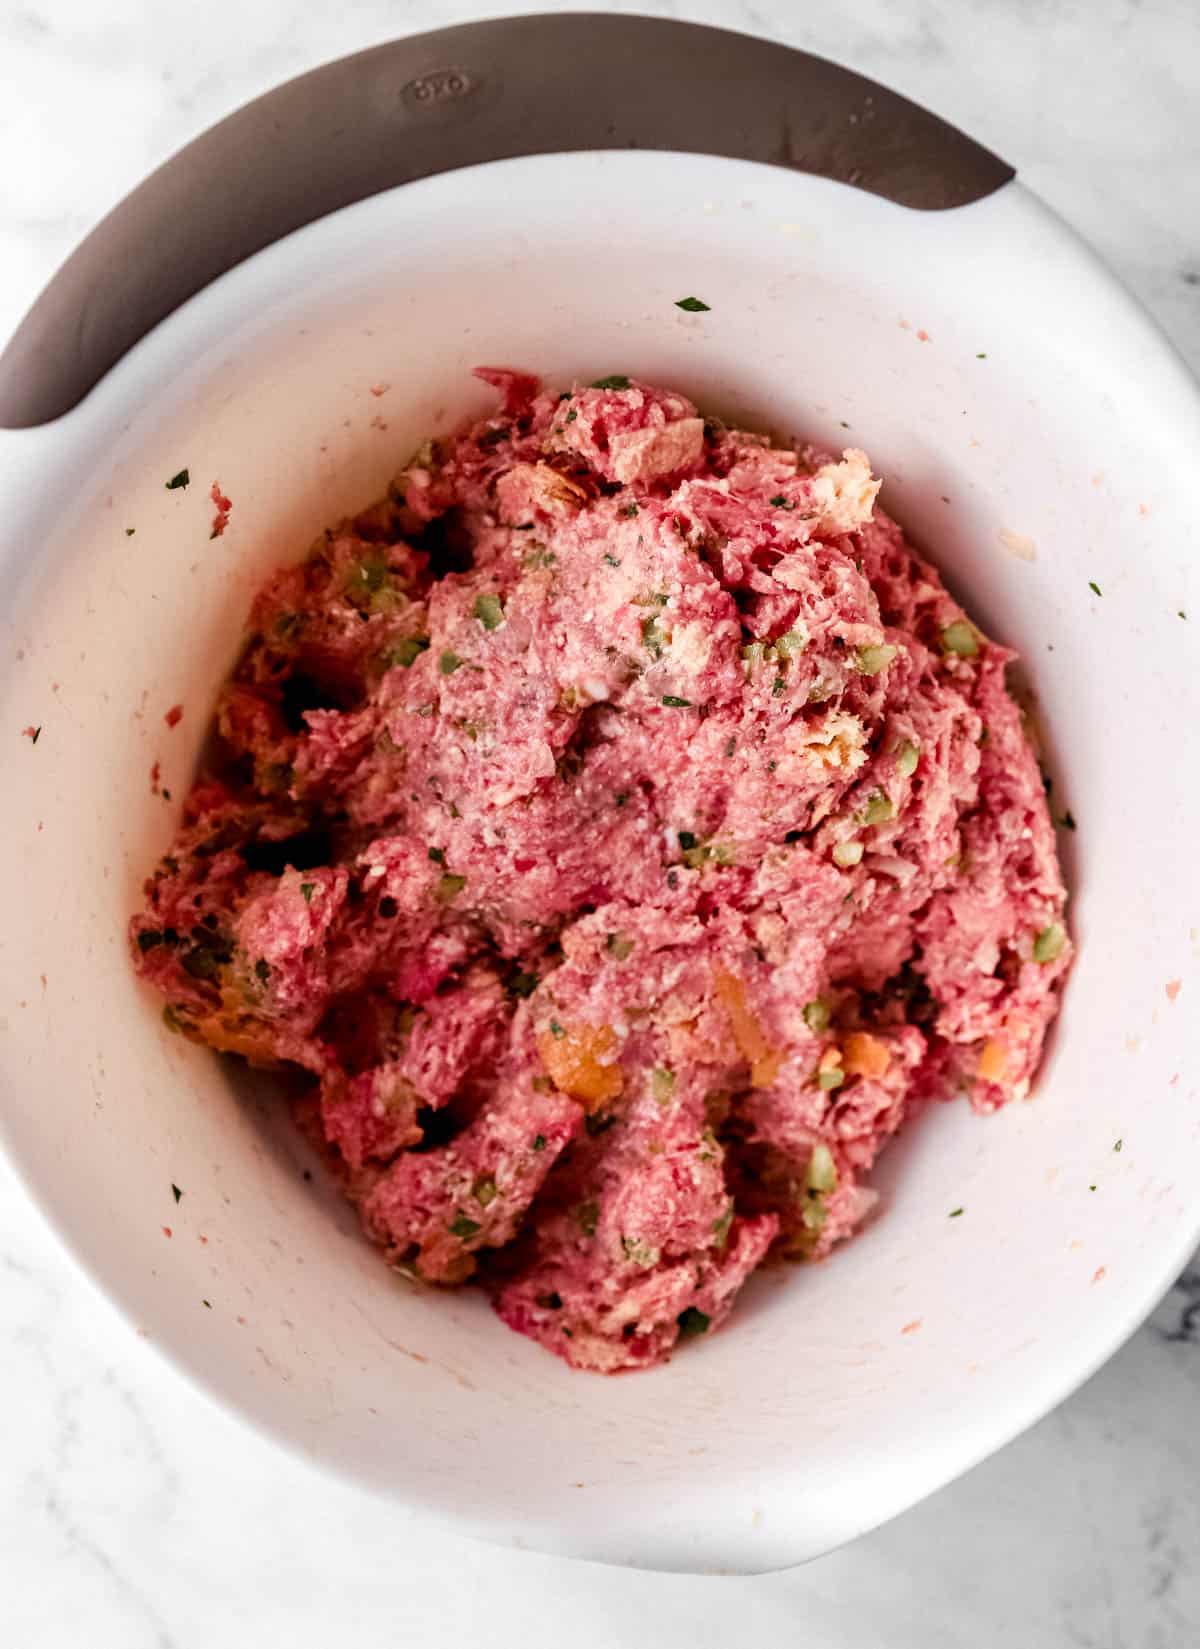 Meat mixture combined in large white mixing bowl. 